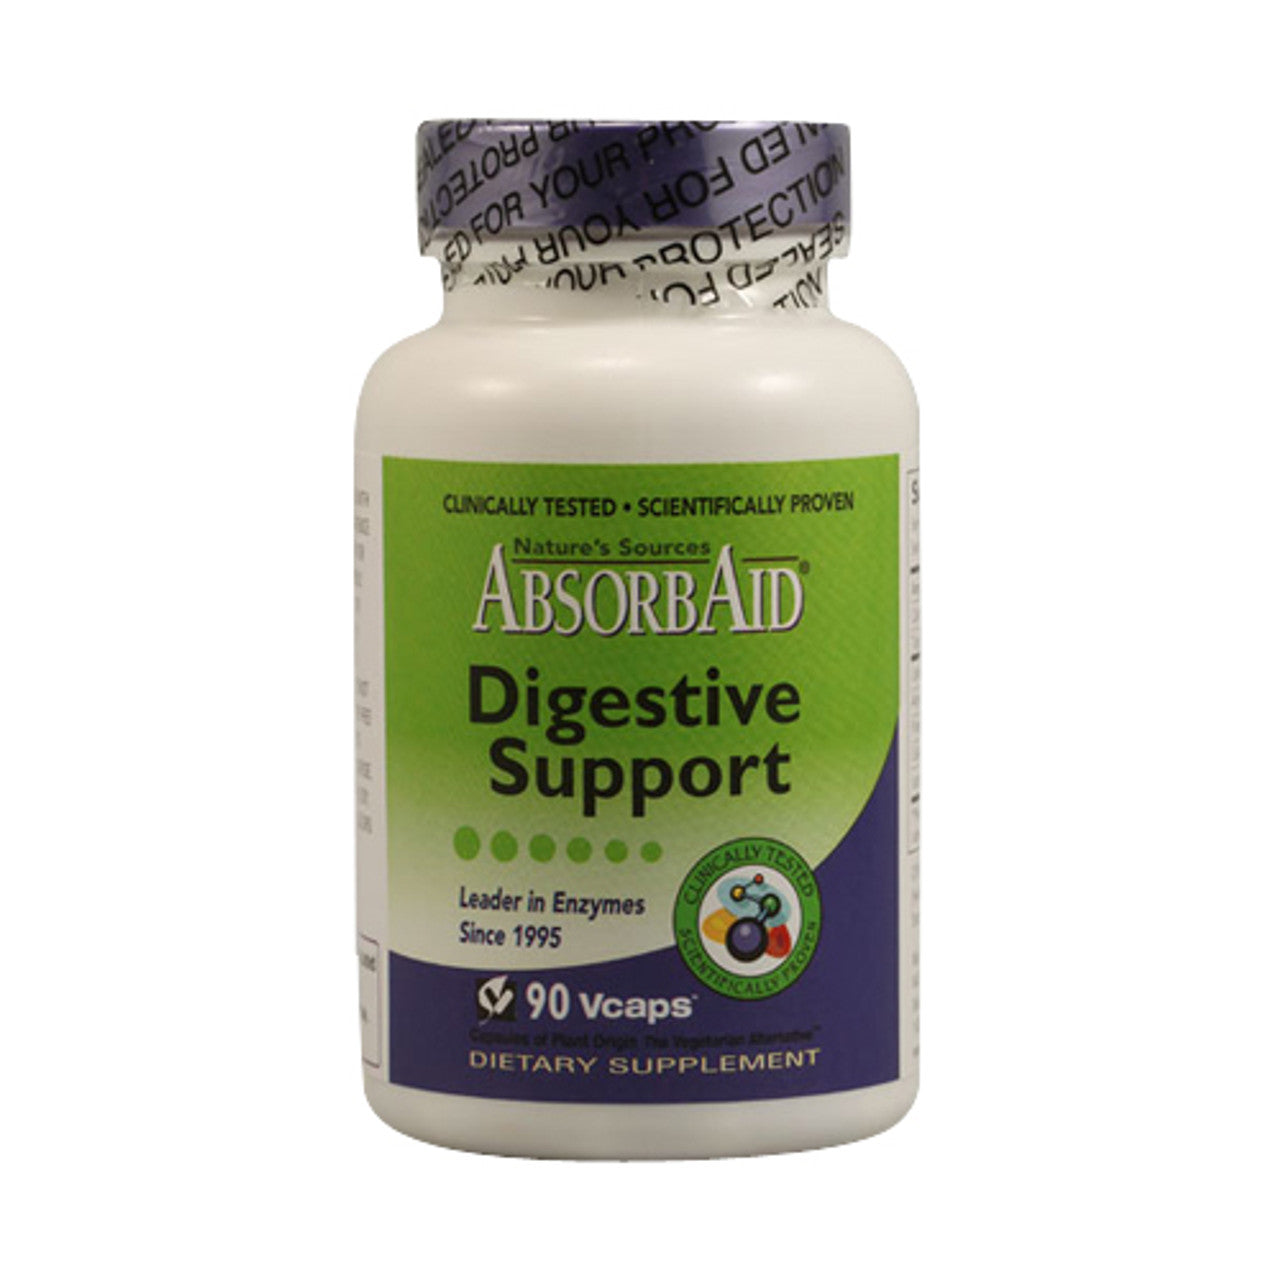 Natures Sources Absorb Aid Digestive Support Vegetarian Capsules - 90 Ea